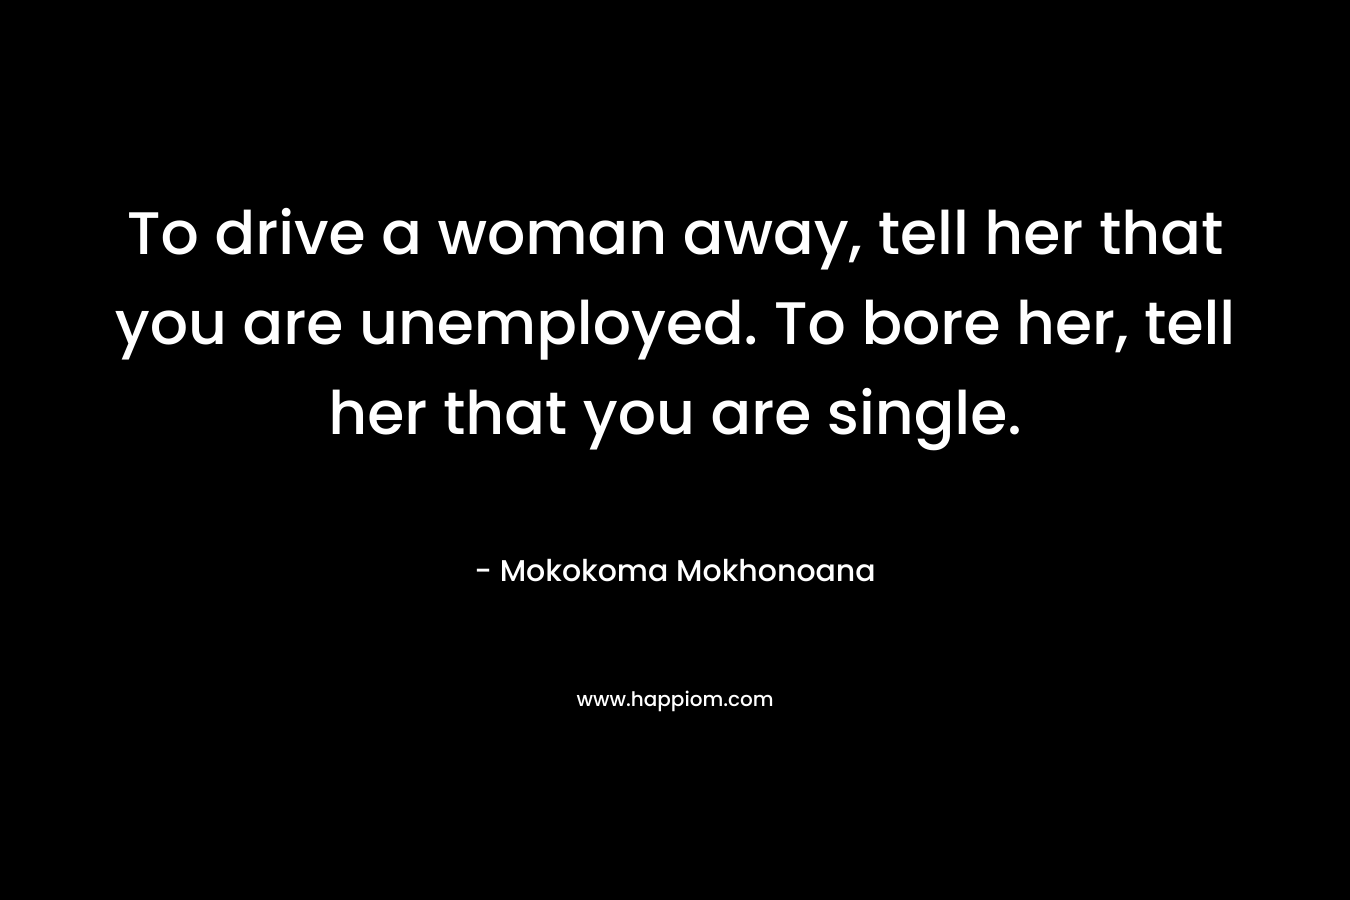 To drive a woman away, tell her that you are unemployed. To bore her, tell her that you are single.